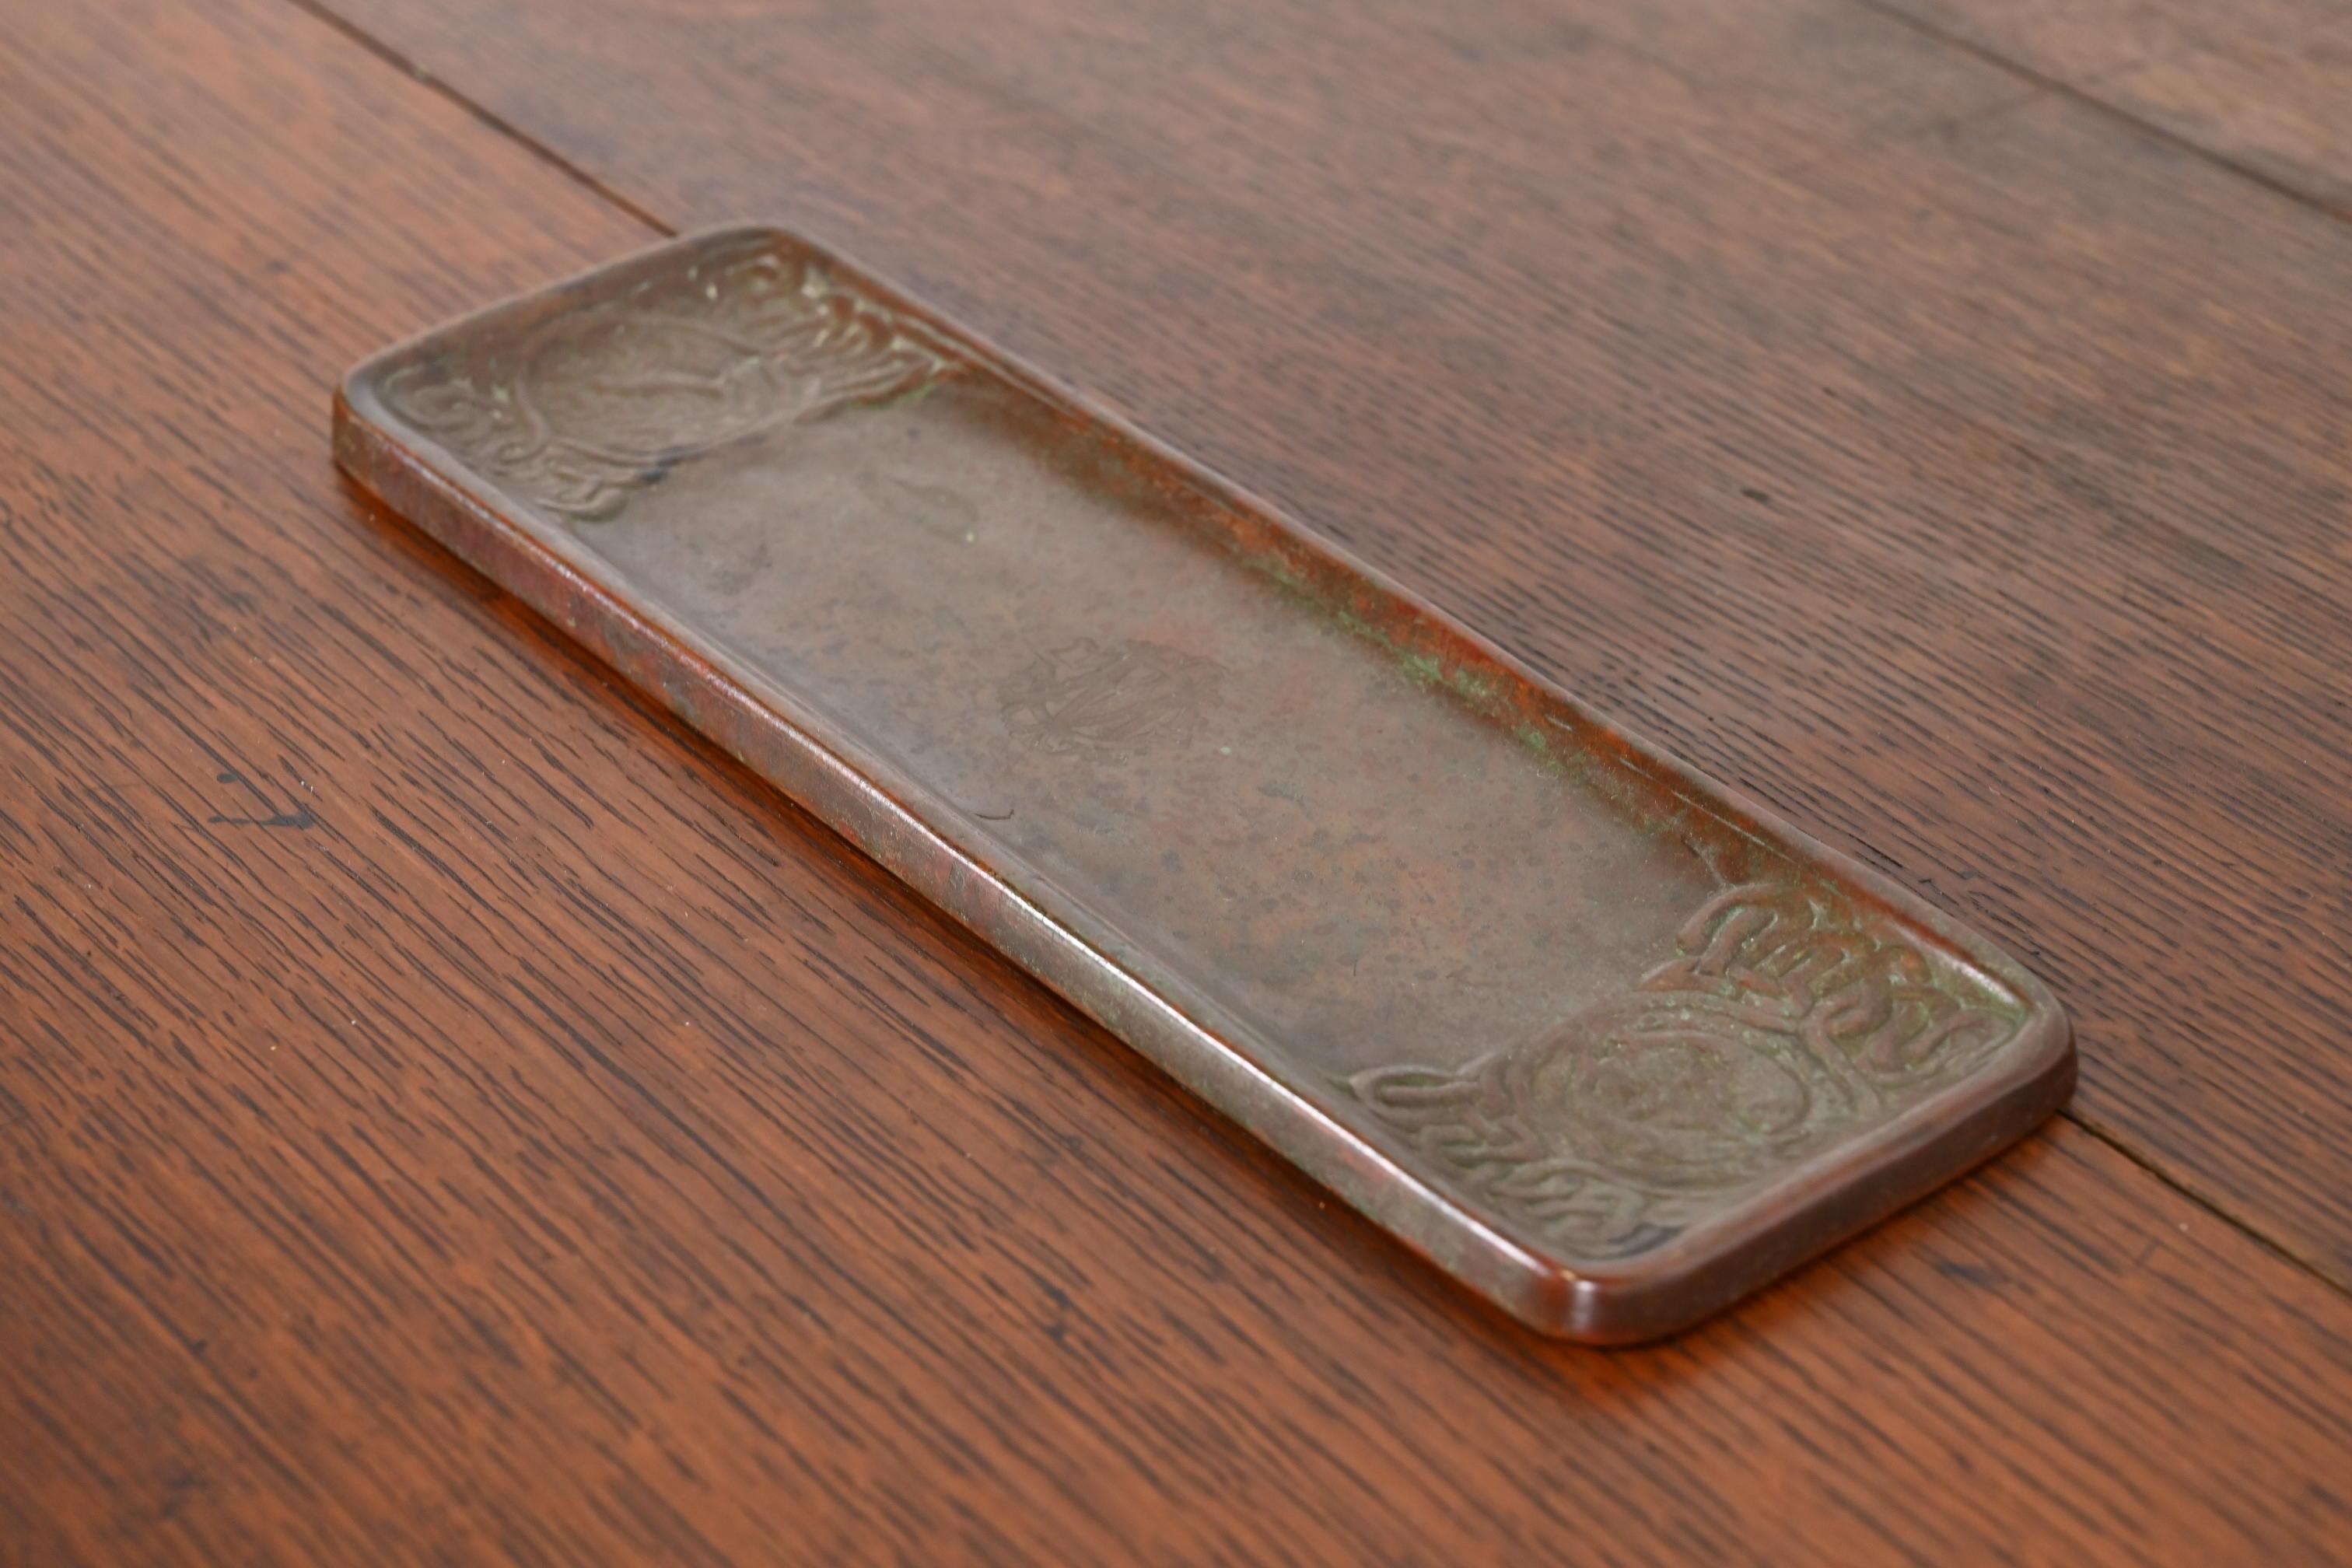 Tiffany Studios New York Zodiac Bronze Pen Tray In Good Condition For Sale In South Bend, IN